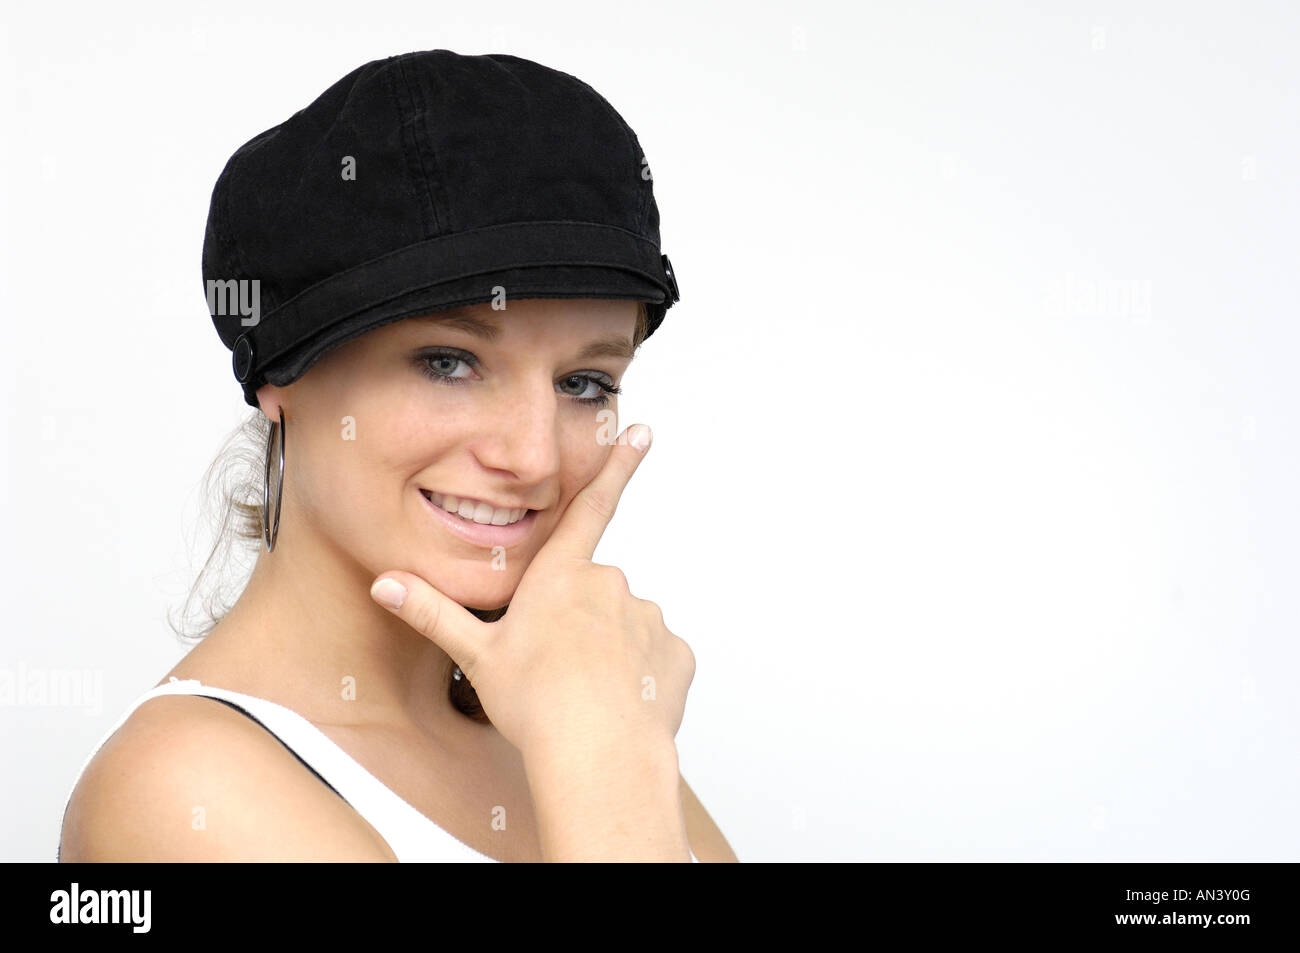 young woman with black cap Stock Photo